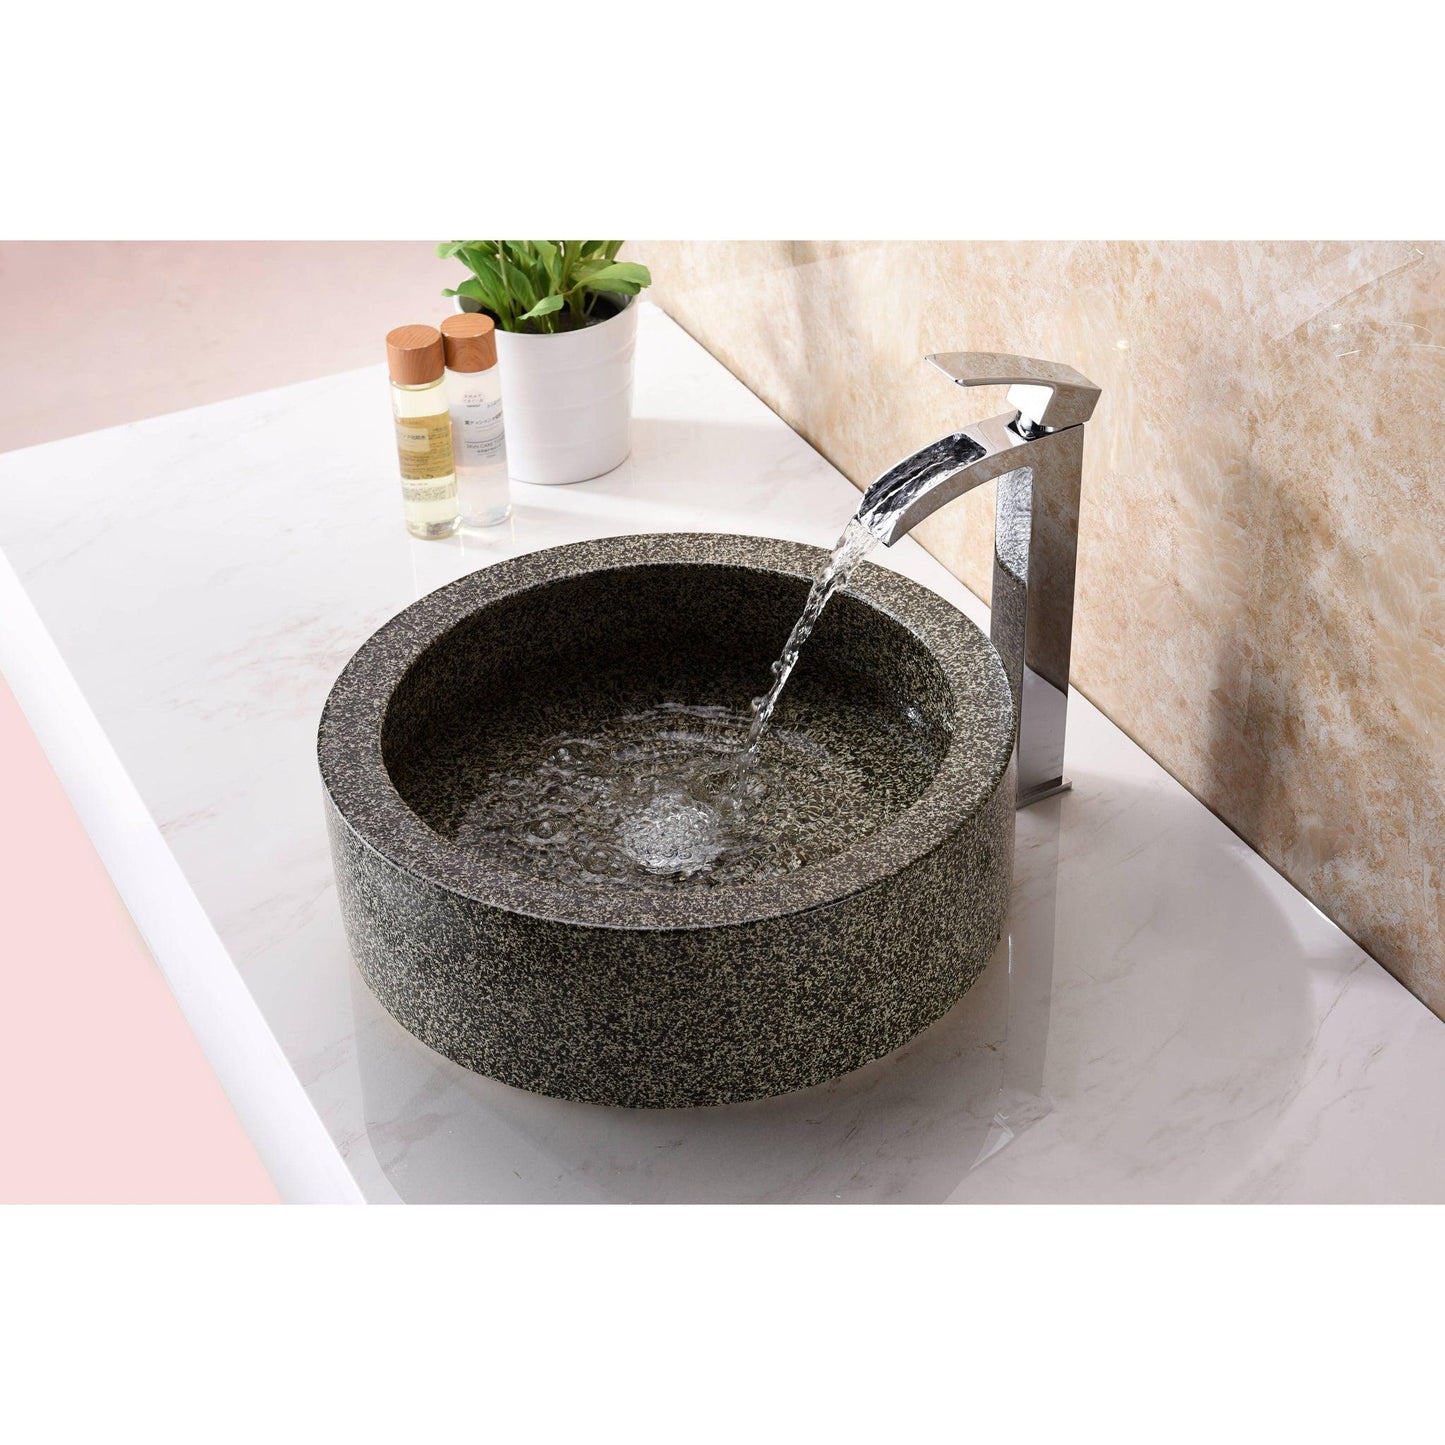 ANZZI Samauga Series 17" x 17" Round Speckled Stone Deco-Glass Vessel Sink With Polished Chrome Pop-Up Drain